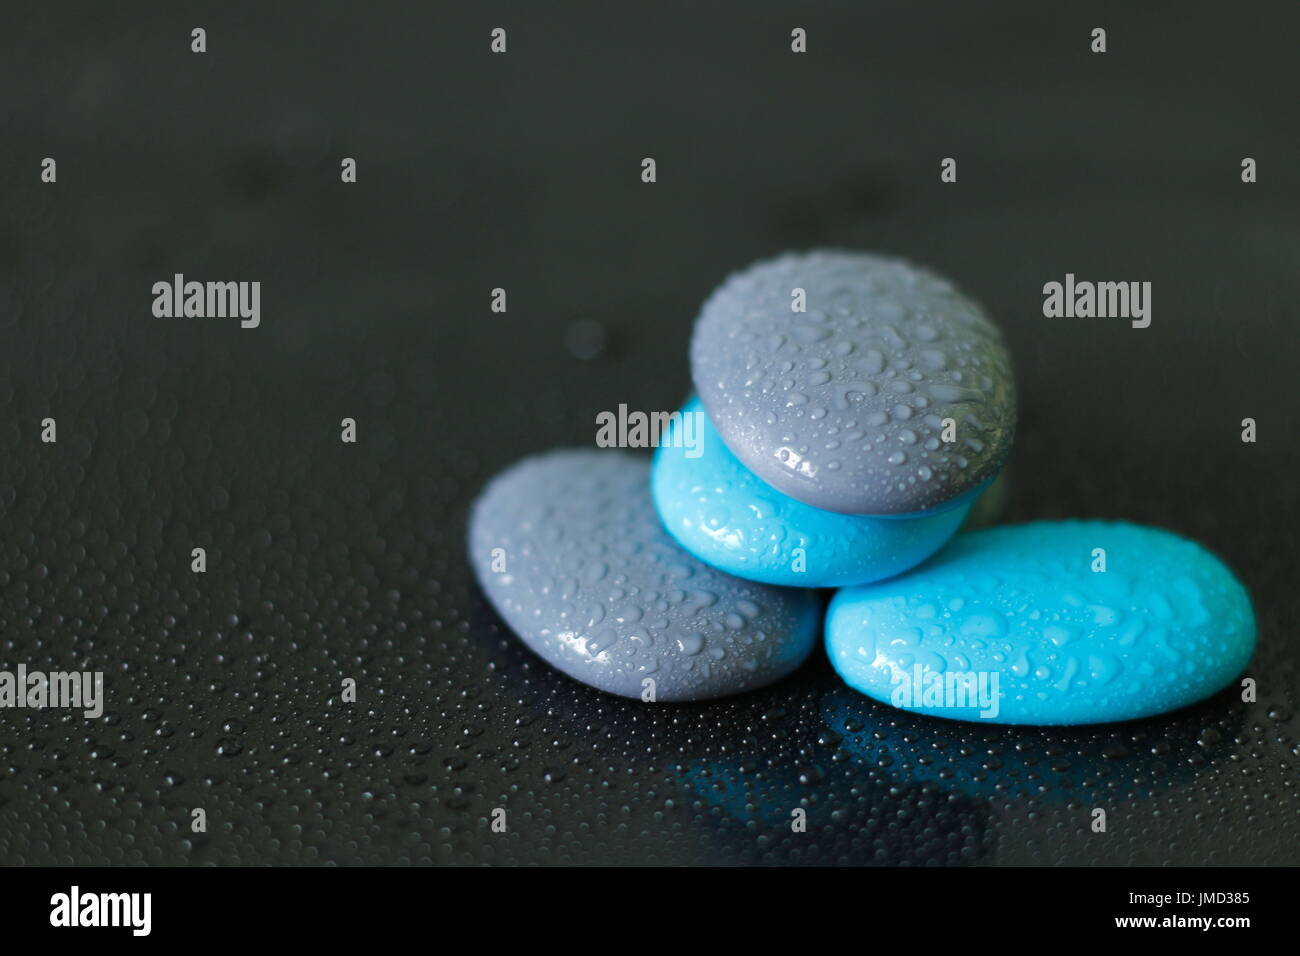 Blue and gray pebbles with drops of water arranged in zen lifestyle on black background Stock Photo